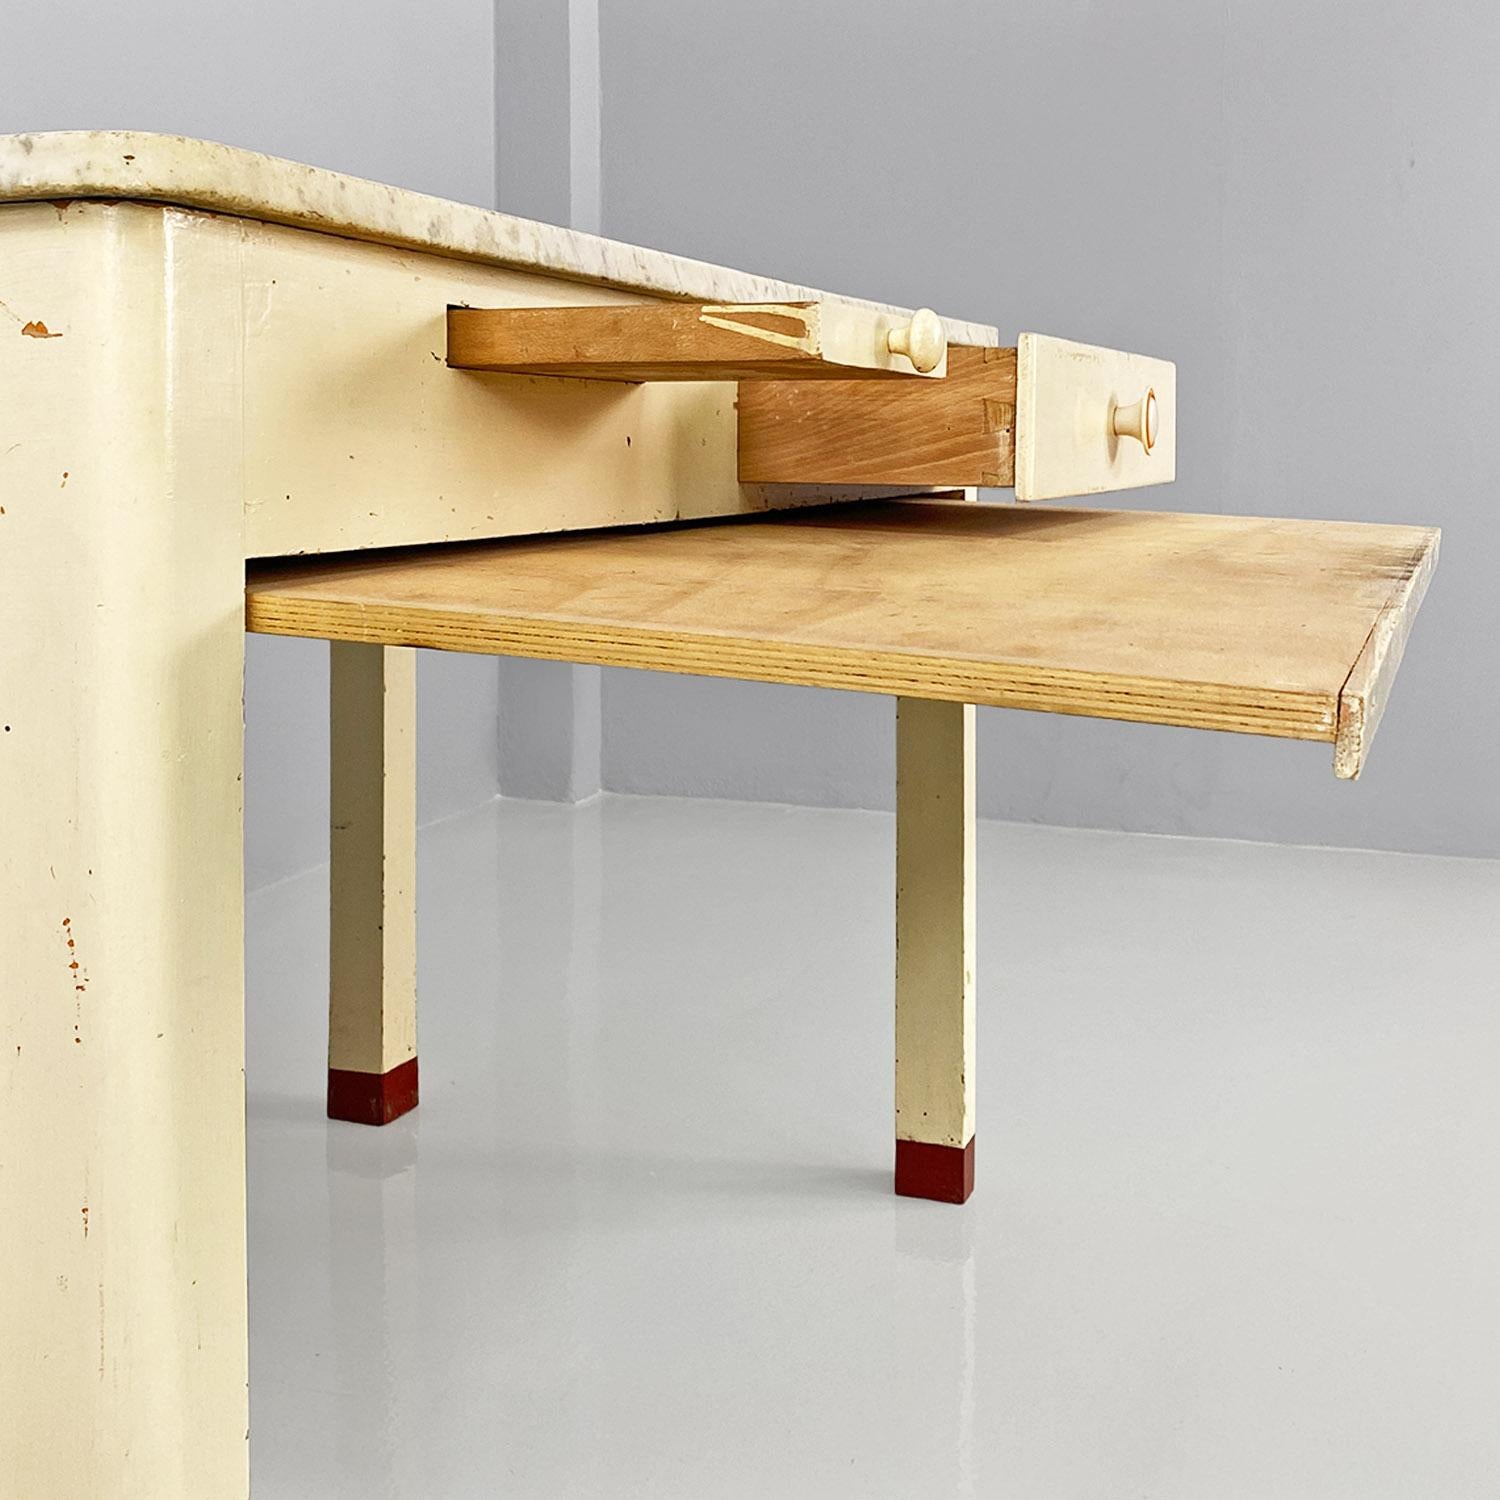 Italian mid-century modern cream wood and marble equipped kitchen table, 1960s For Sale 1